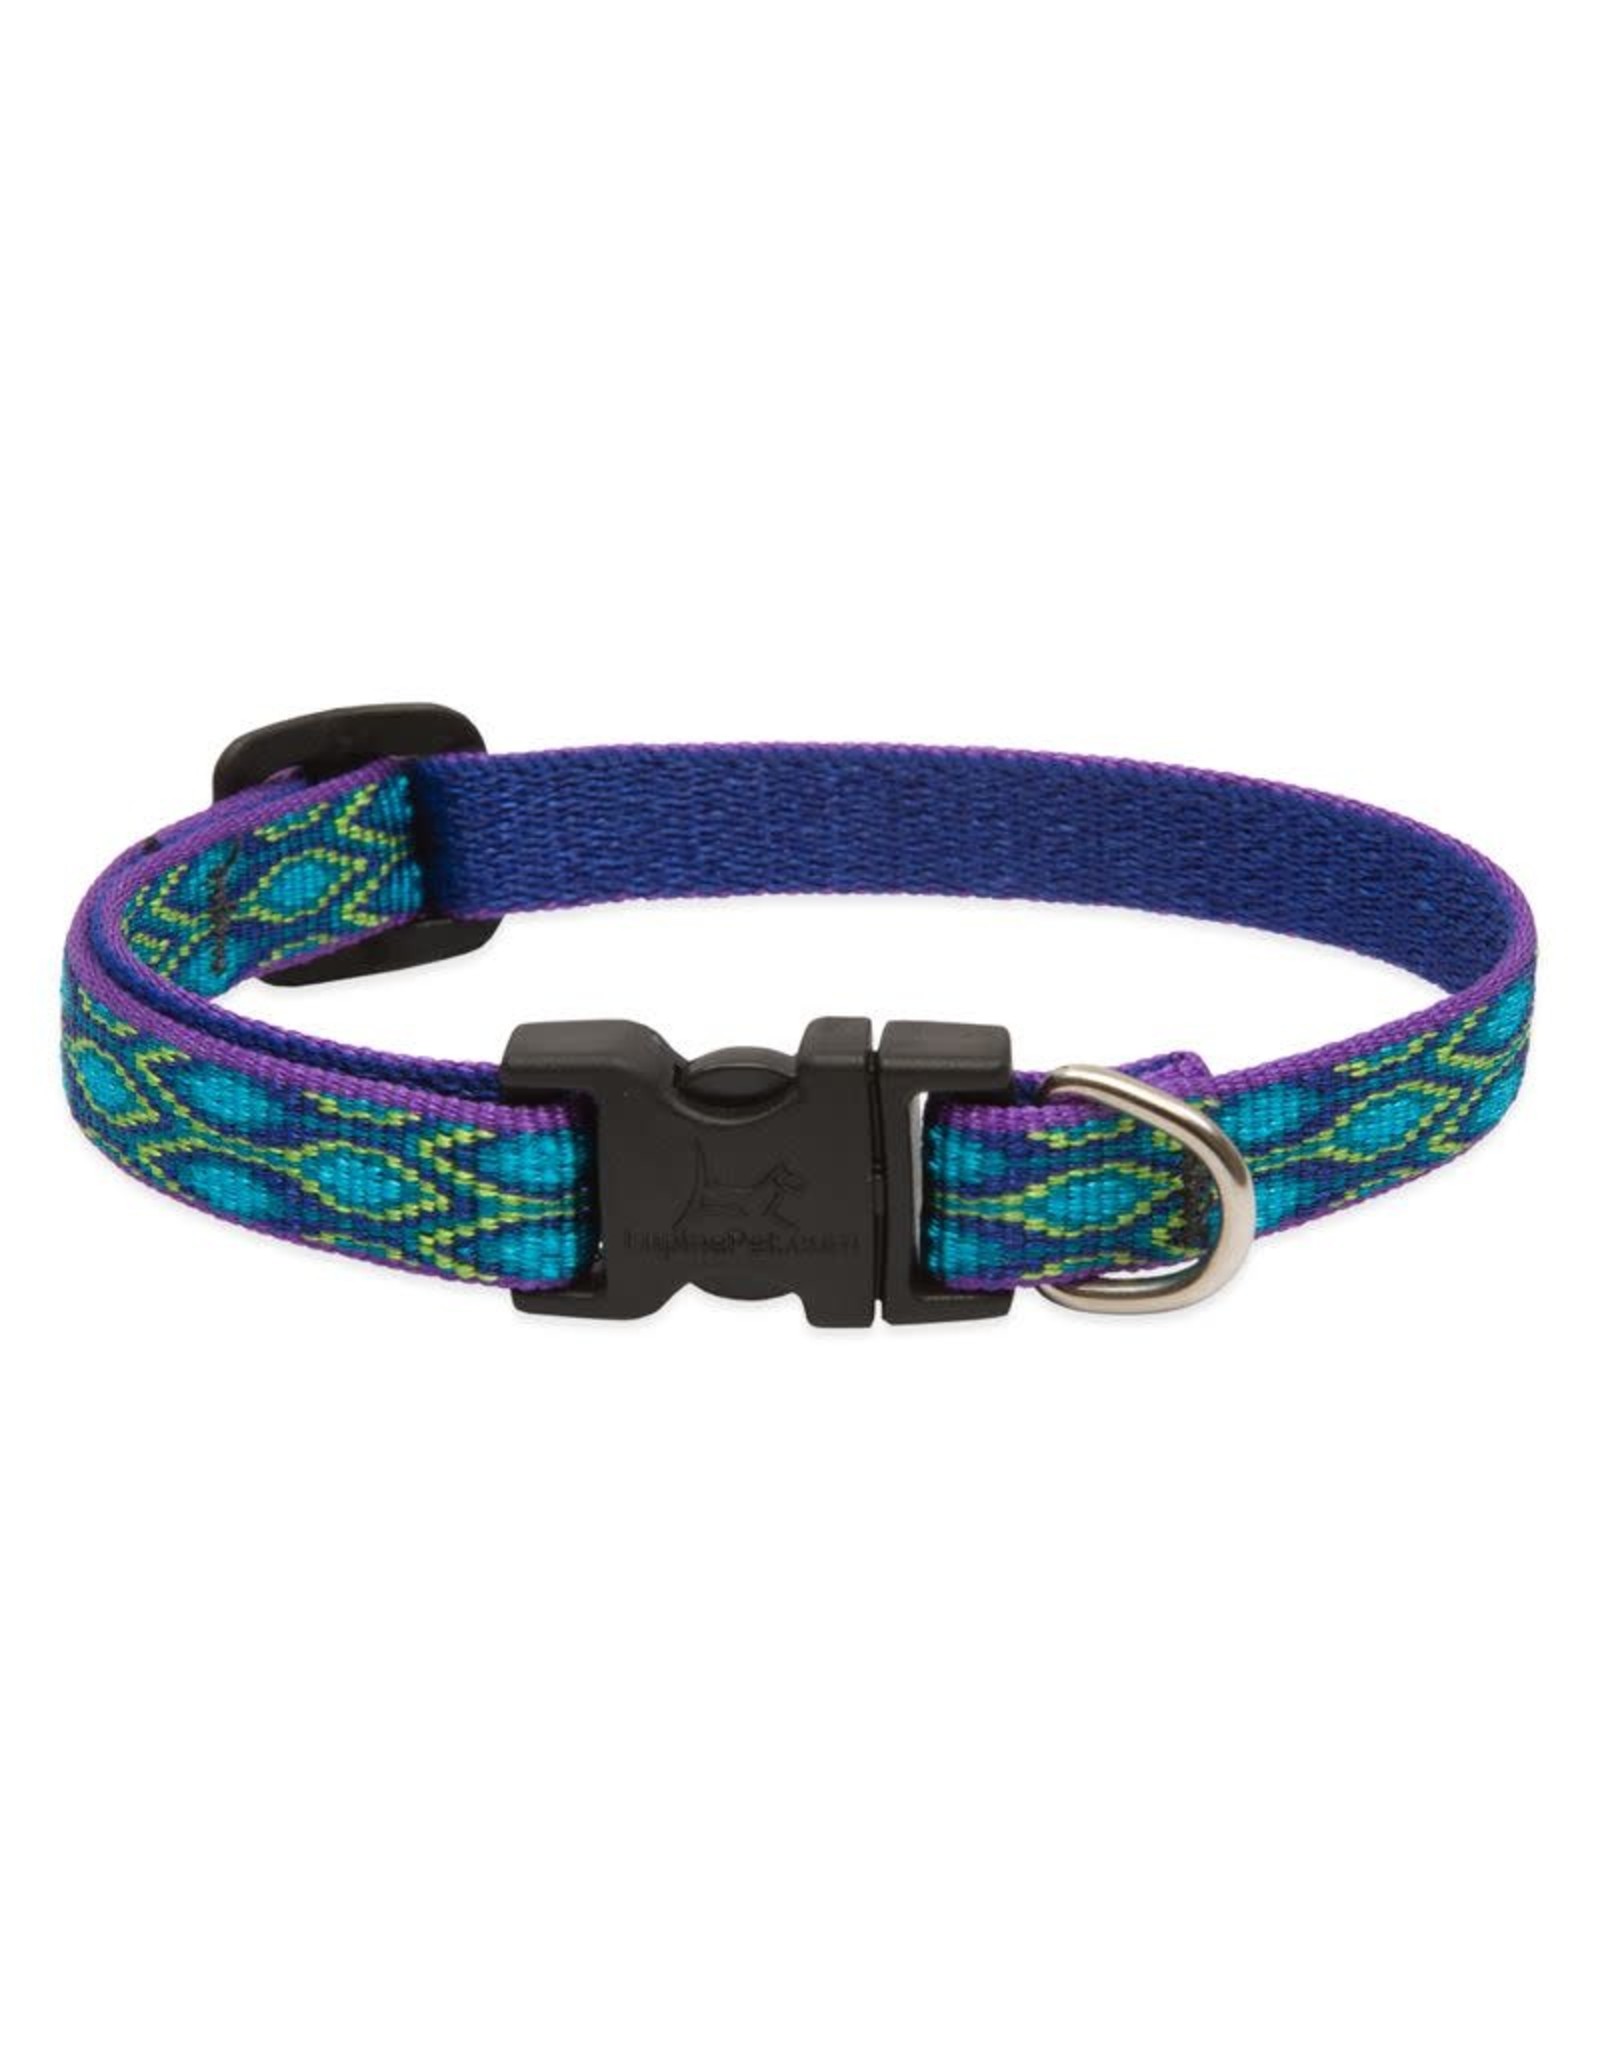 Lupine Lupine Rain Song Collar: 3/4 in wide, 9-14 inch